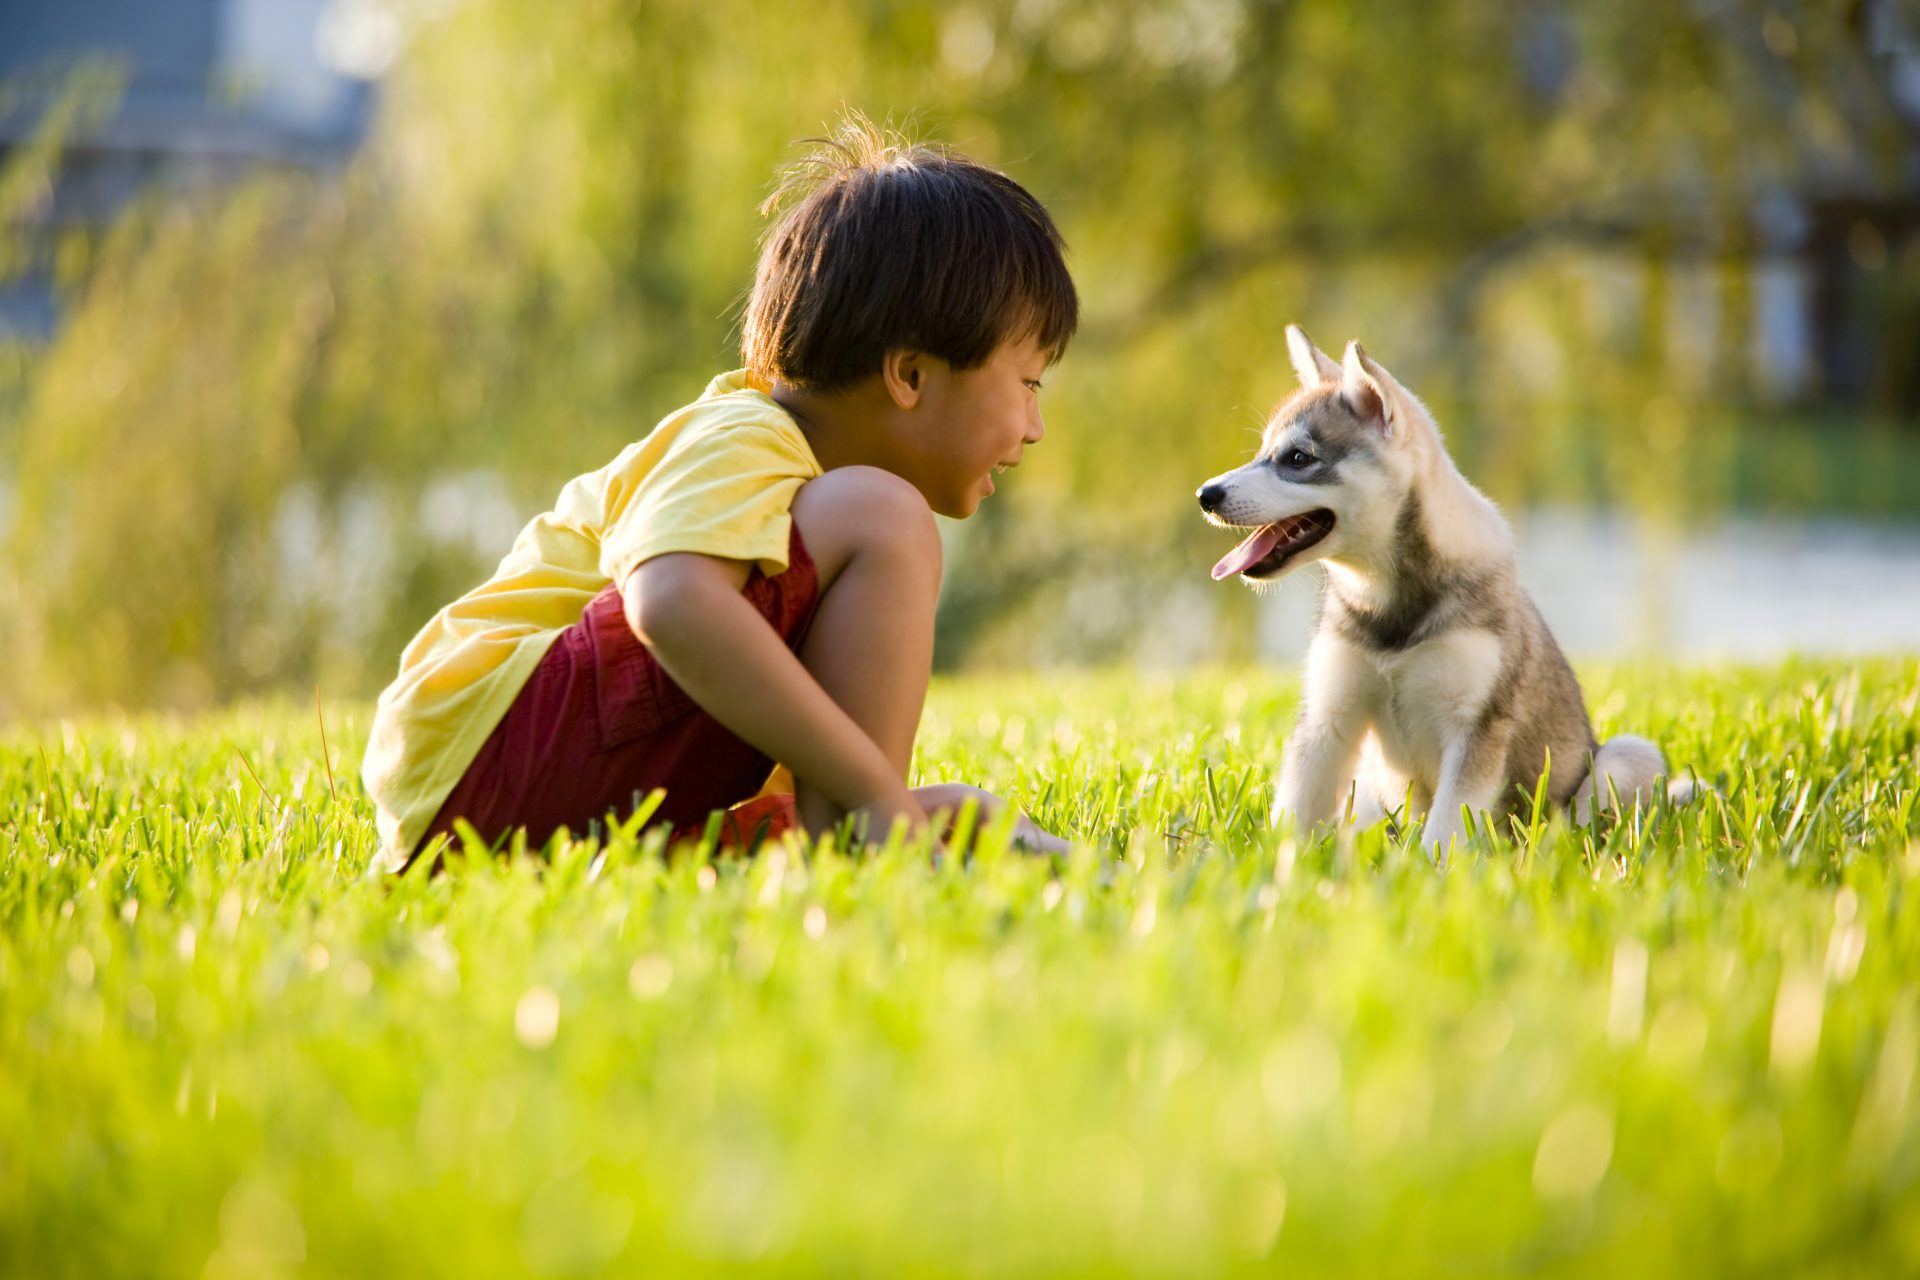 dog bites and boy playing with puppy on grass